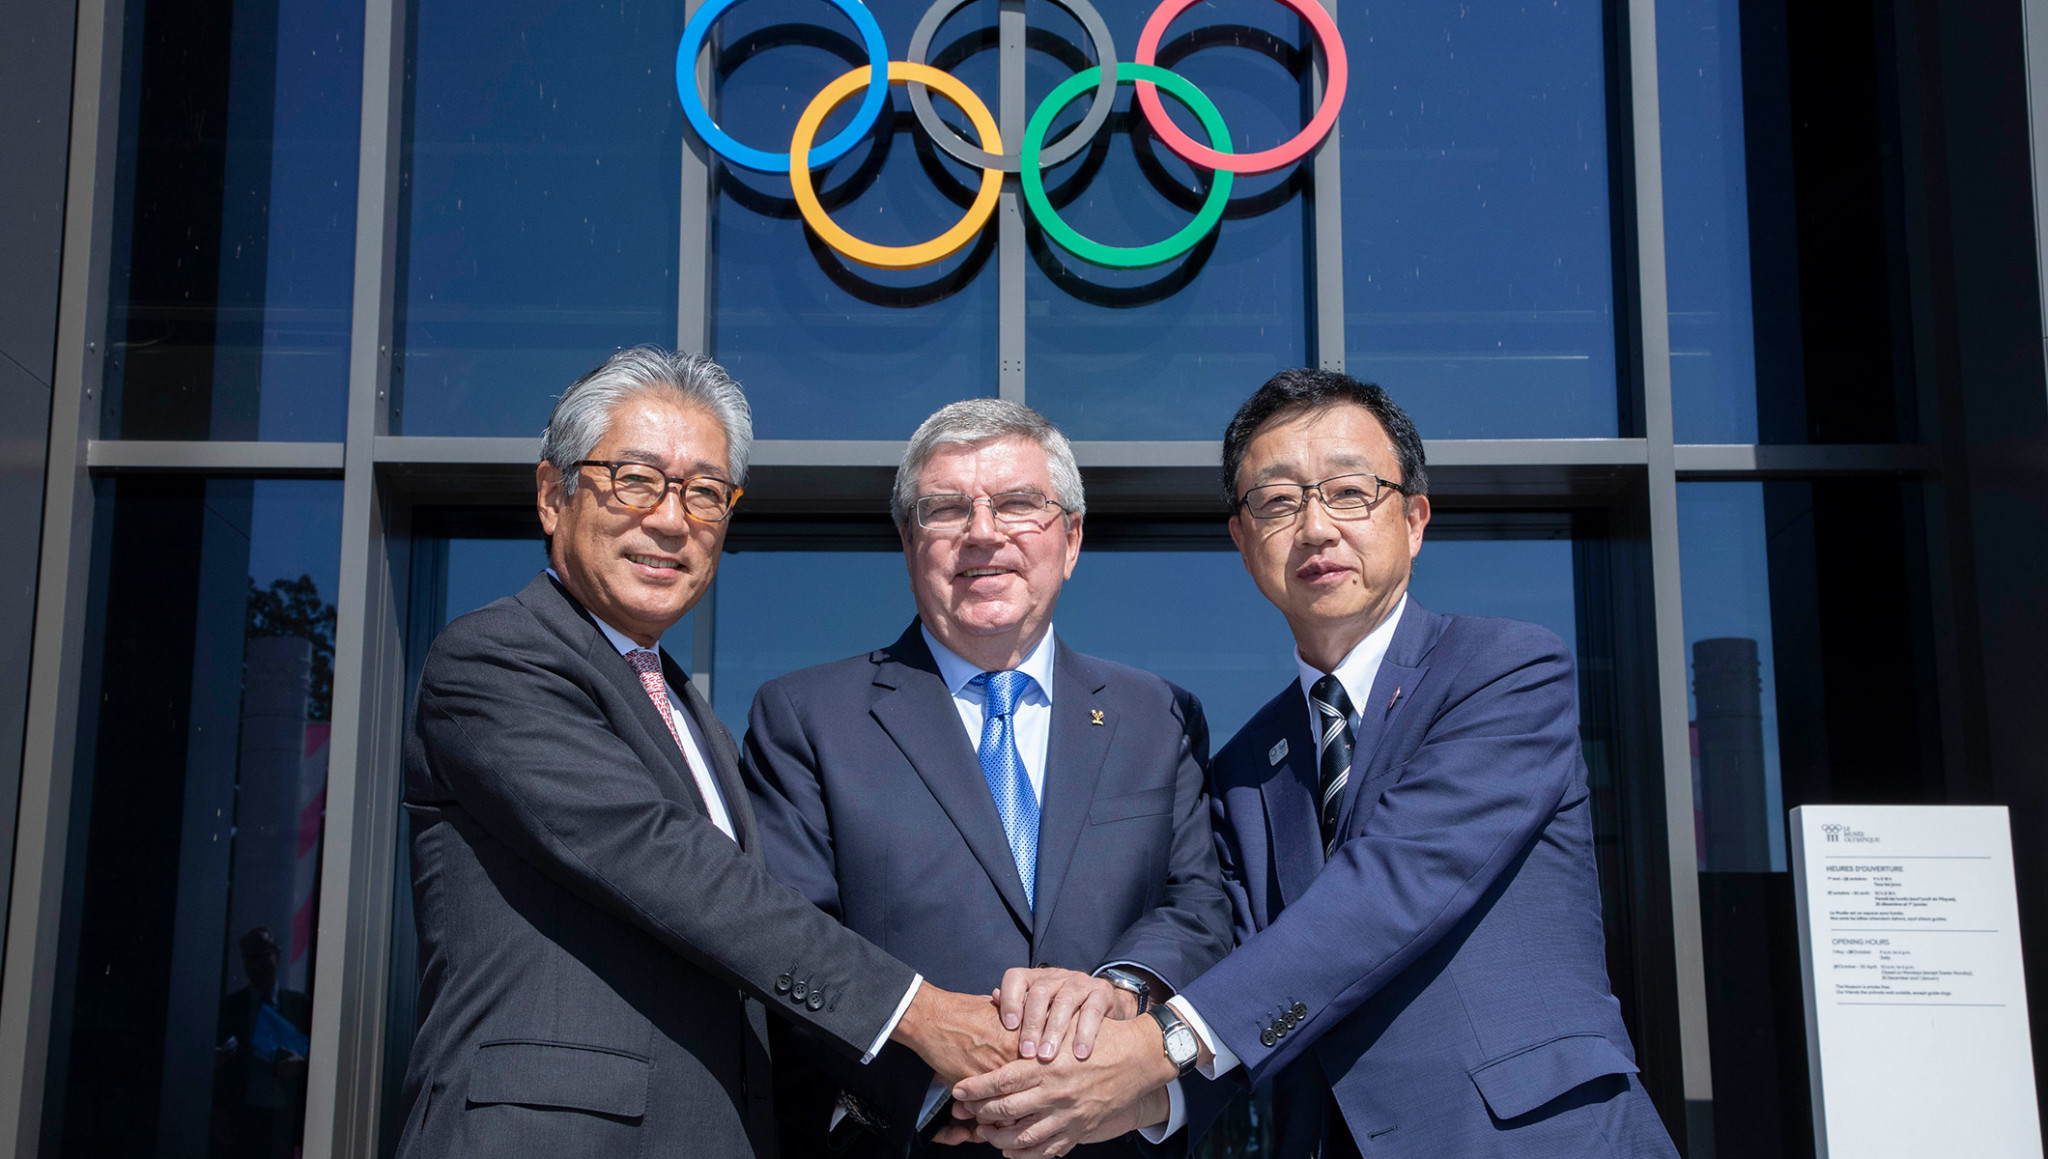 Sapporo withdraws from race for 2026 Winter Olympics and Paralympics to focus on 2030